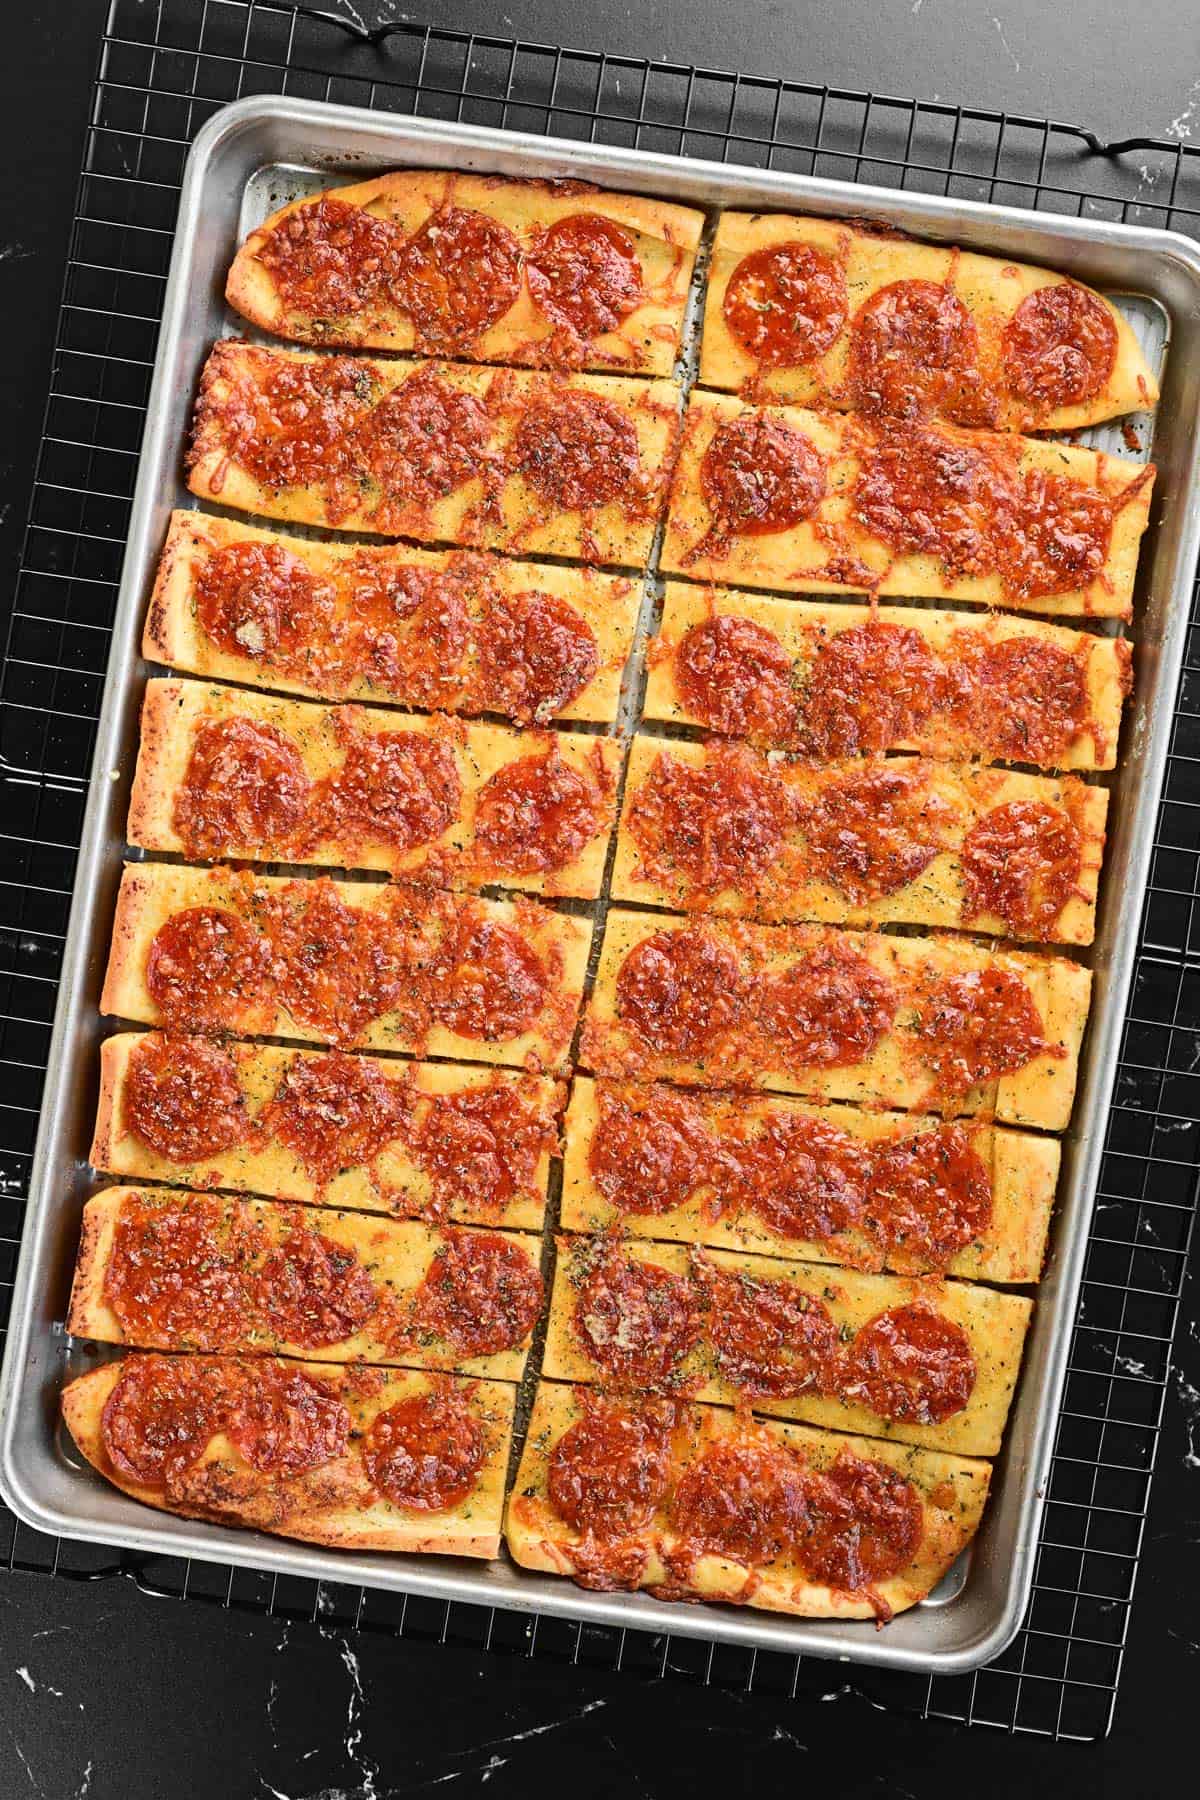 Baked pizza sticks in a pan.